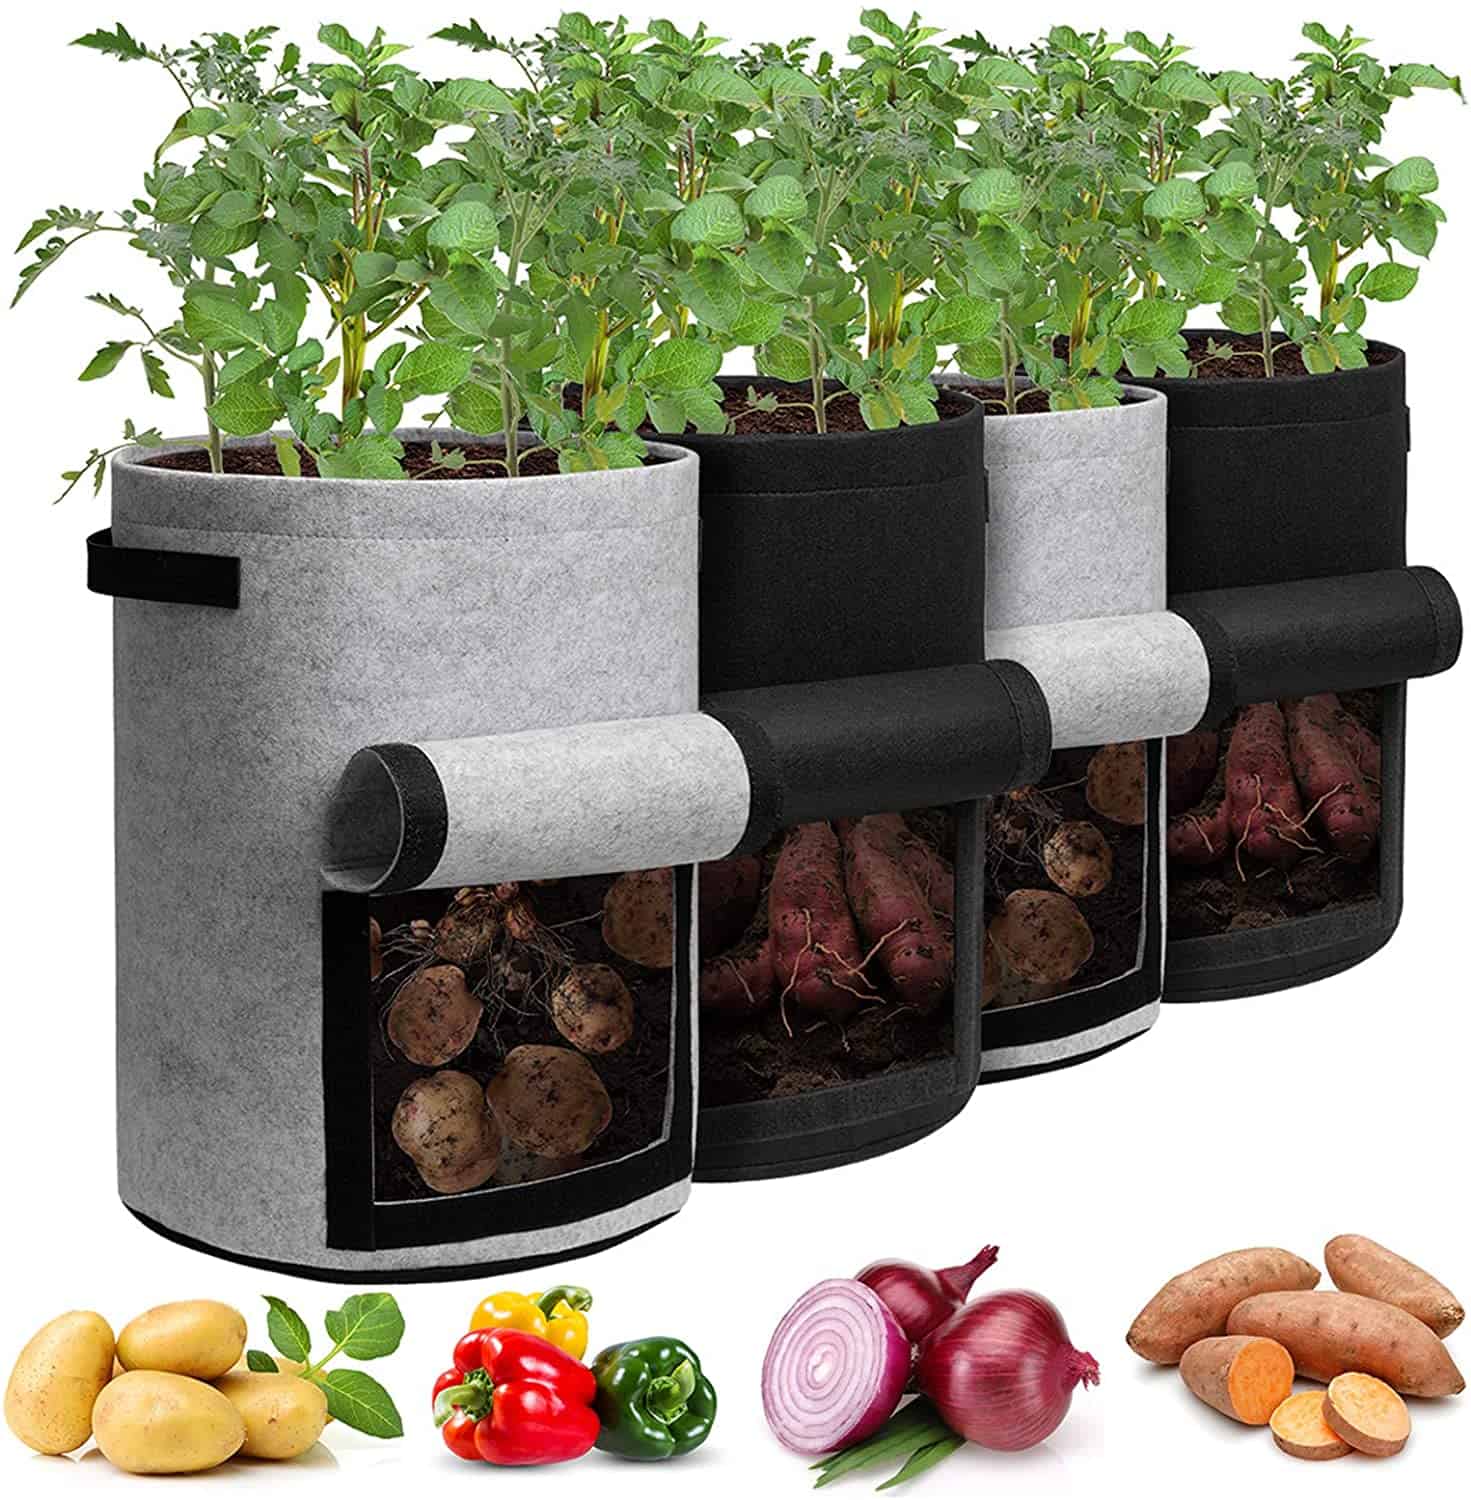 Potato Grow Bags with Flap 10 Gallon, 4 Pack Planter Pot with Handles and Harvest Window for Potato Tomato and Vegetables, Black and Gray